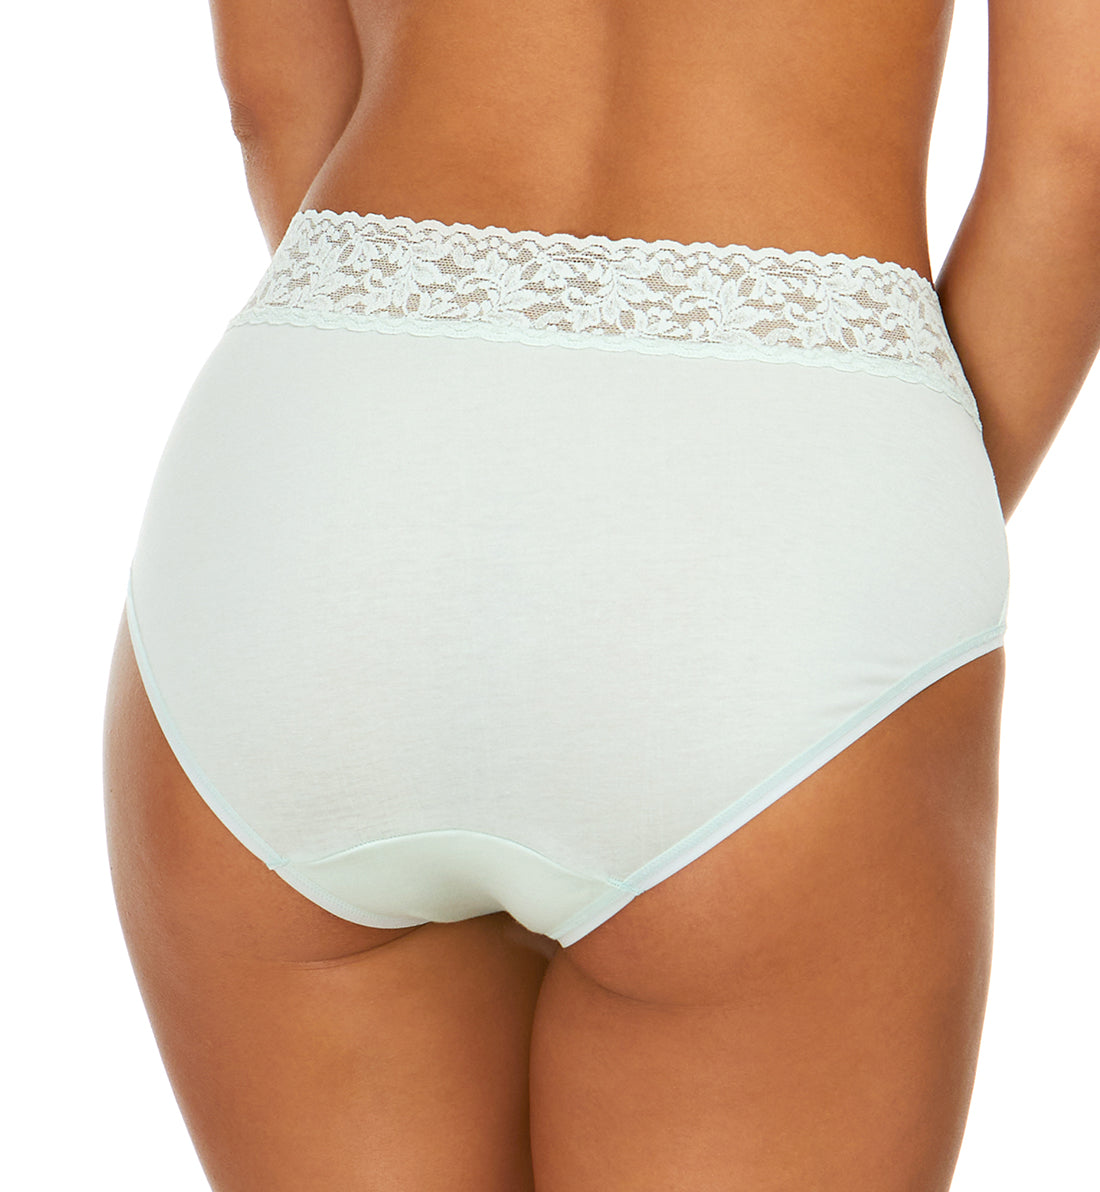 Hanky Panky Organic Cotton French Brief with Lace (892461),Small,Cucumber - Cucumber,Small